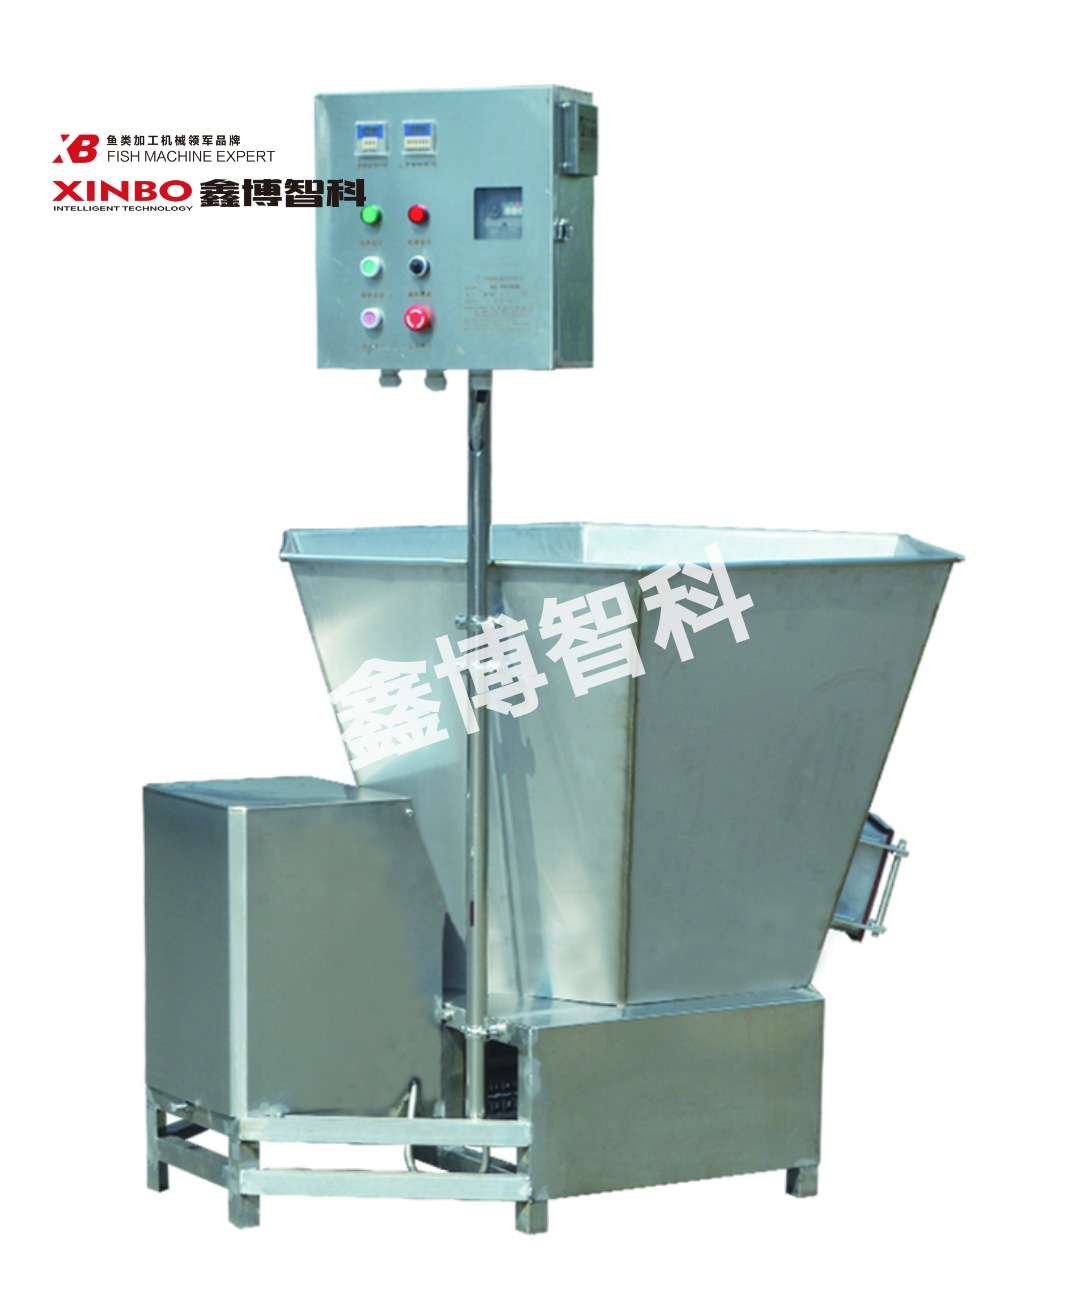 XBF-618章鱼、鱿鱼类清洗机Octopus and squid cleaning machine